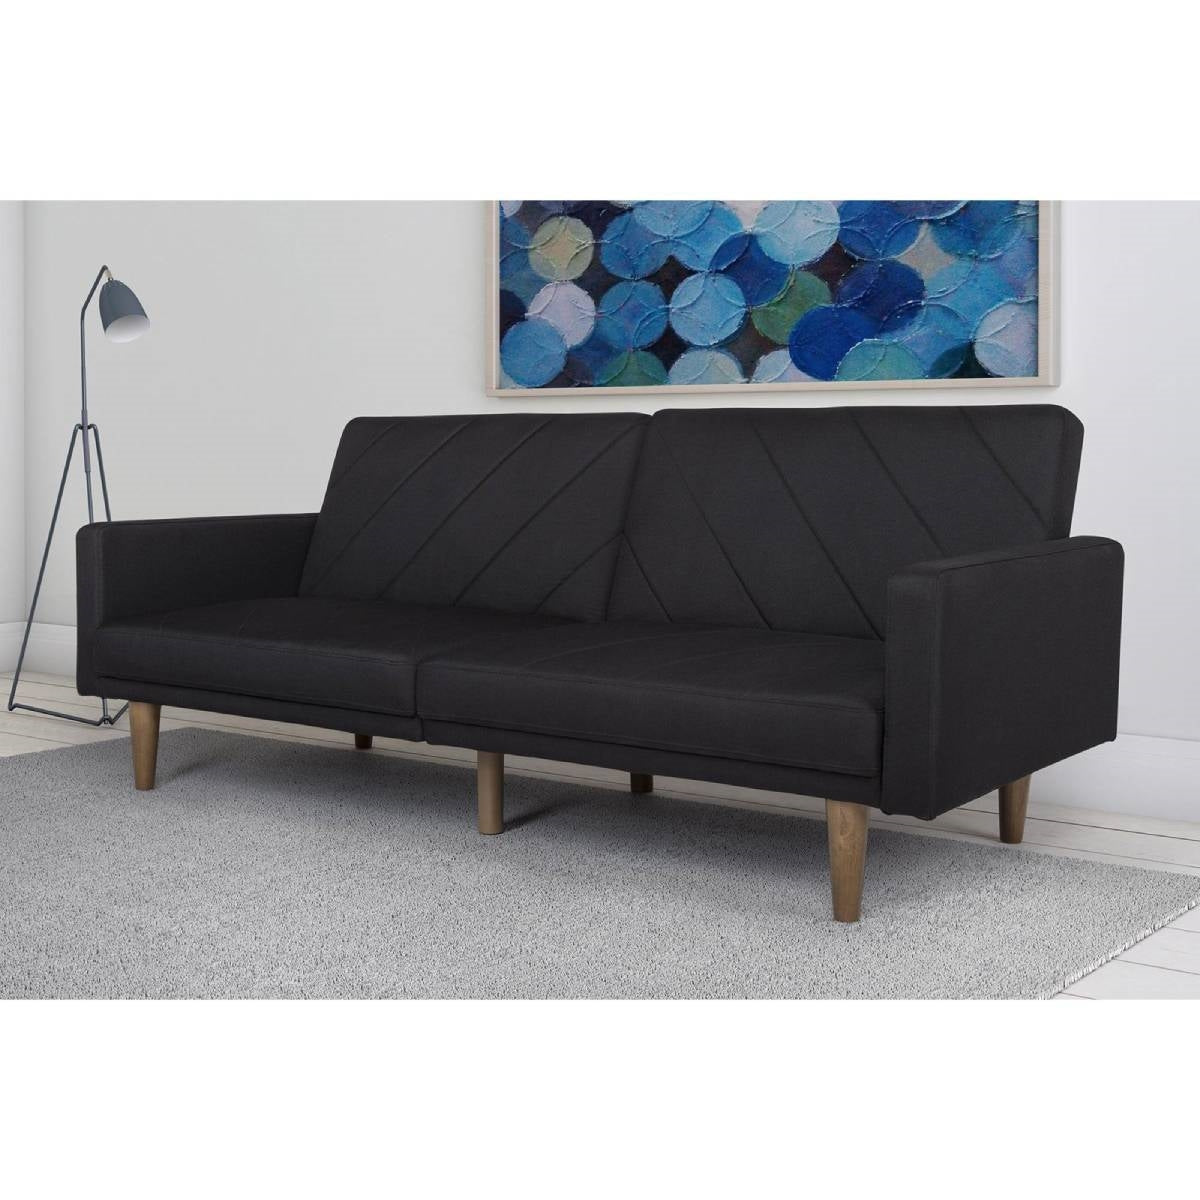 Living Room > Sofas - Black Mid-Century Modern Linen Upholstered Sofa Bed With Classic Wood Legs